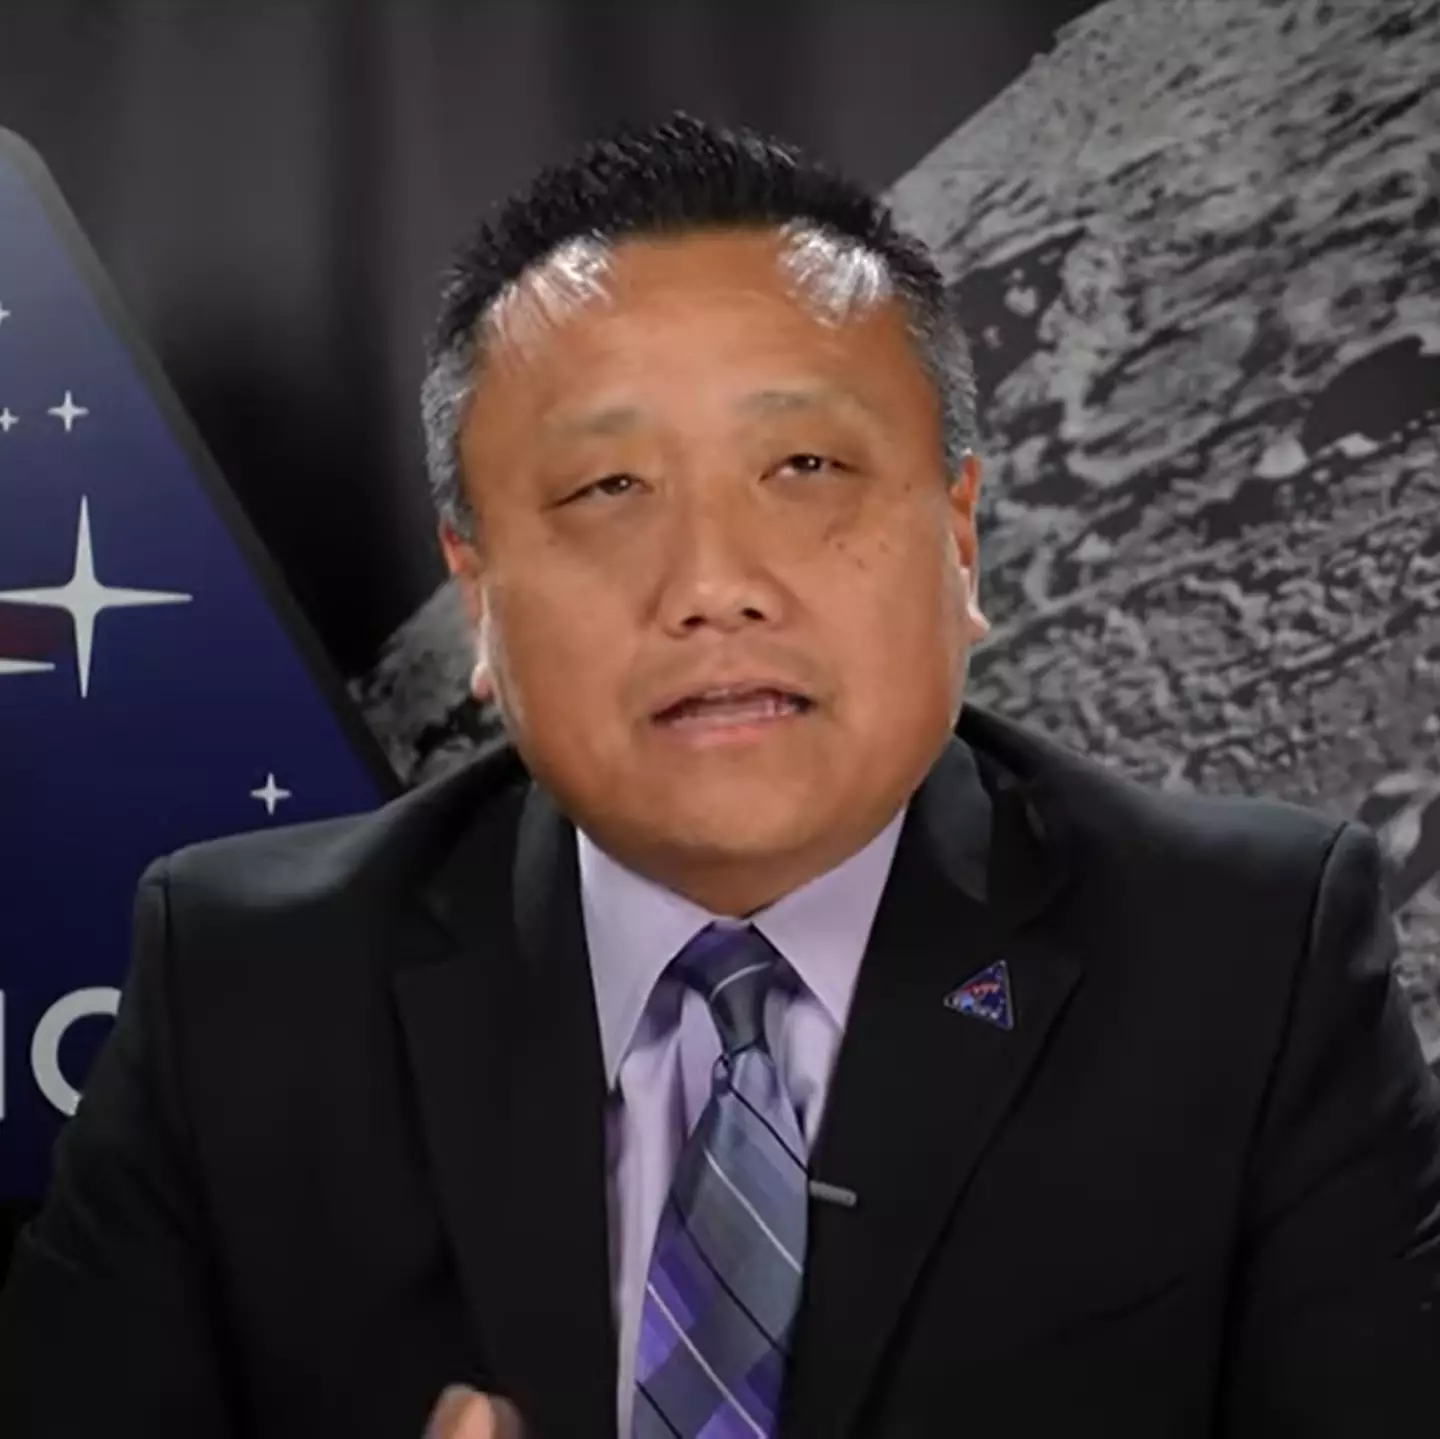 The NASA chief says humans will be living on the Moon this decade.